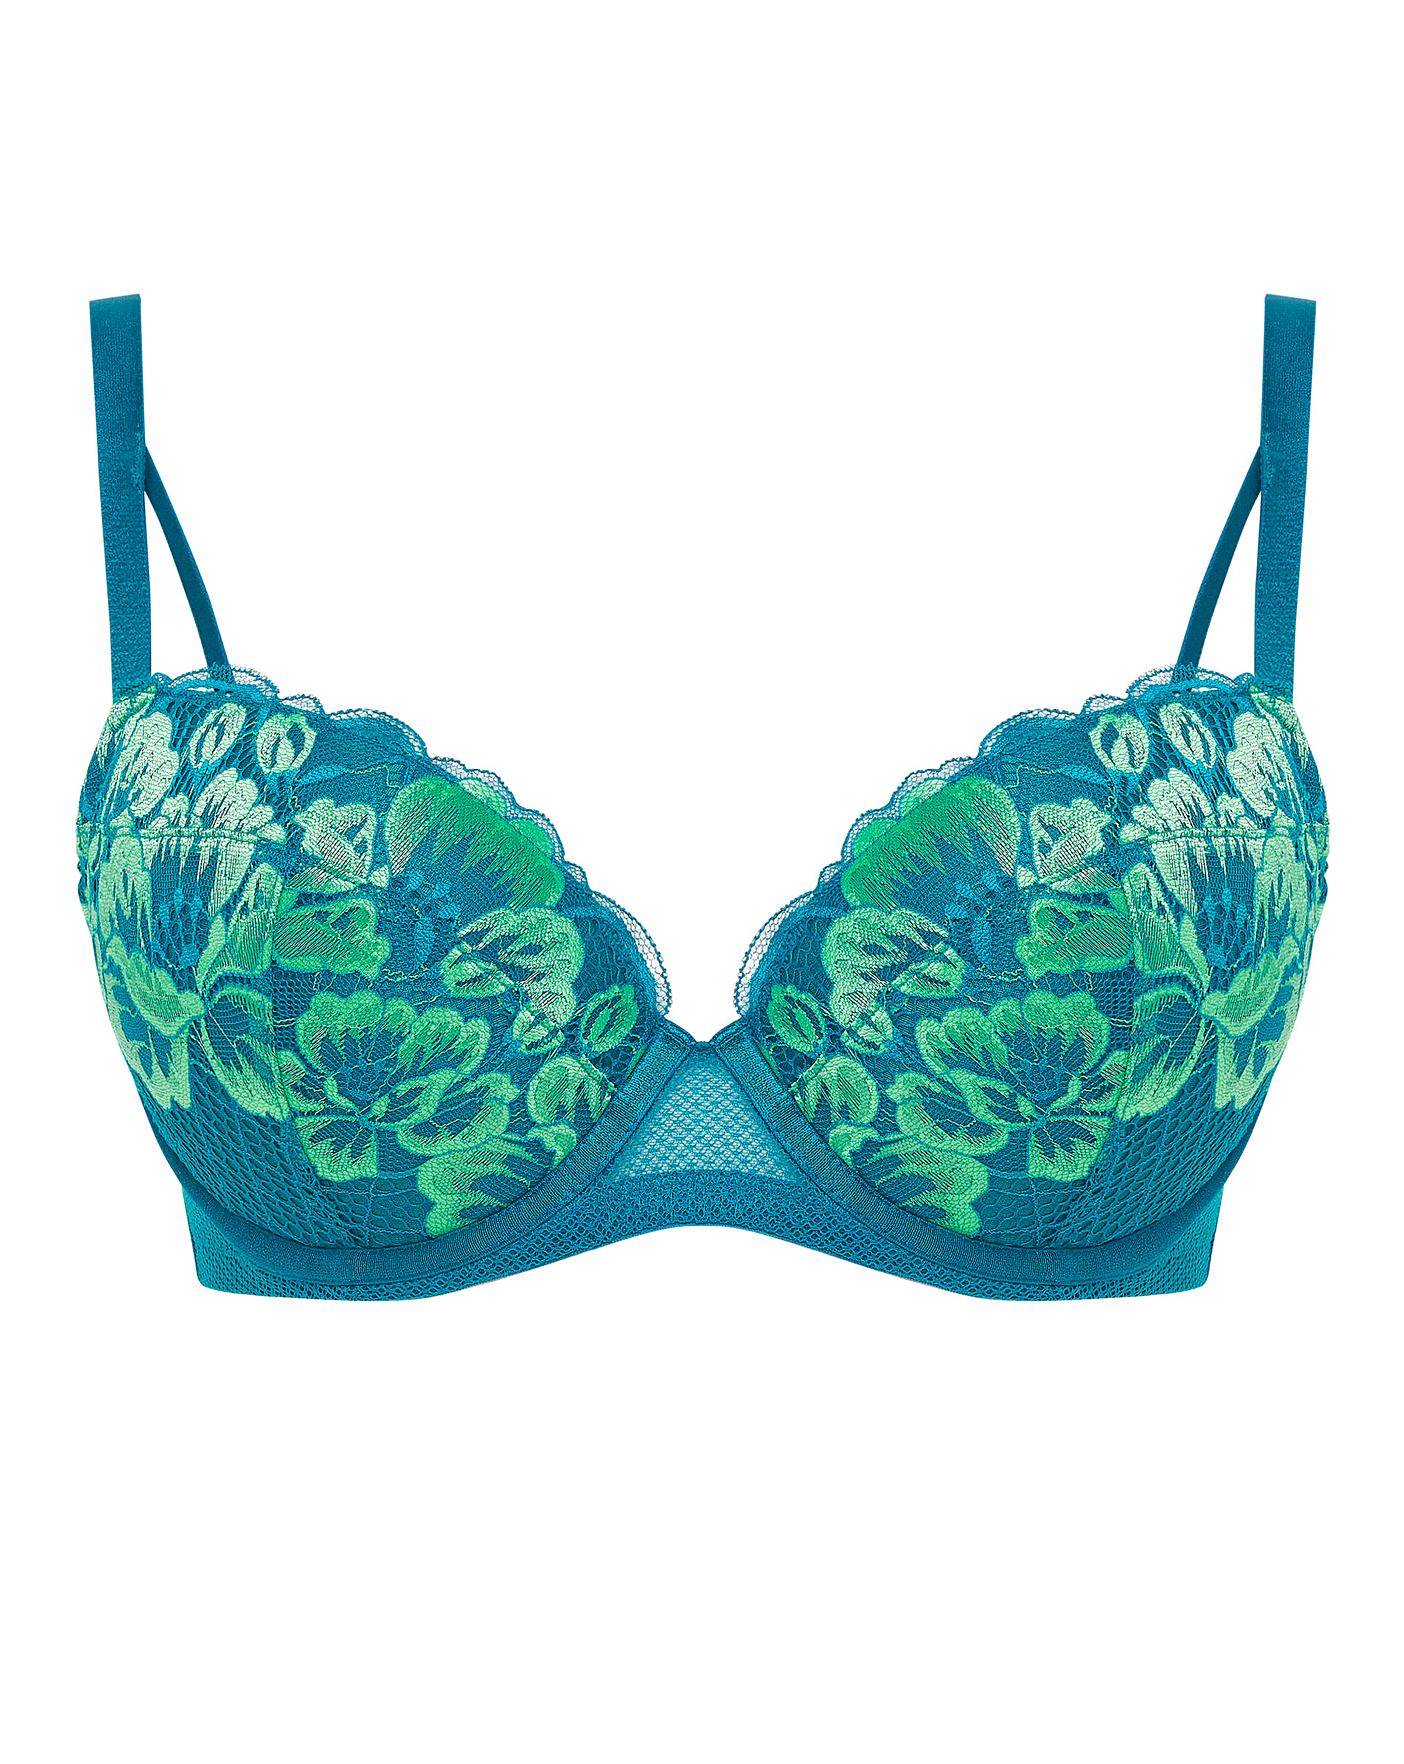 Ann Summers Honey Suckle padded plunge bra in blue and green contrast